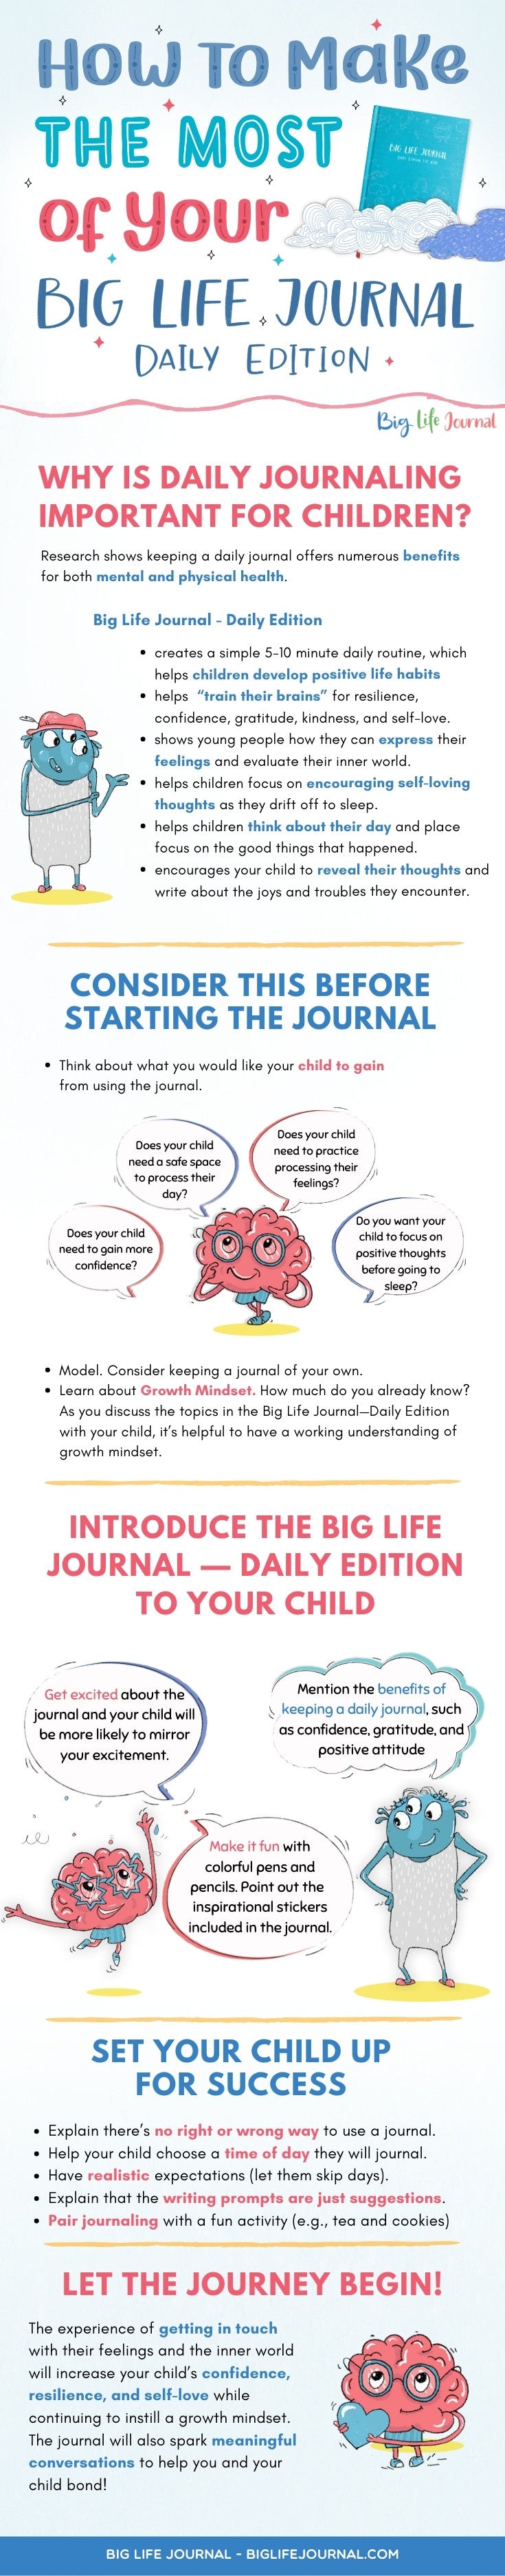 Making the most of your Big Life Journal-Daily Edition 